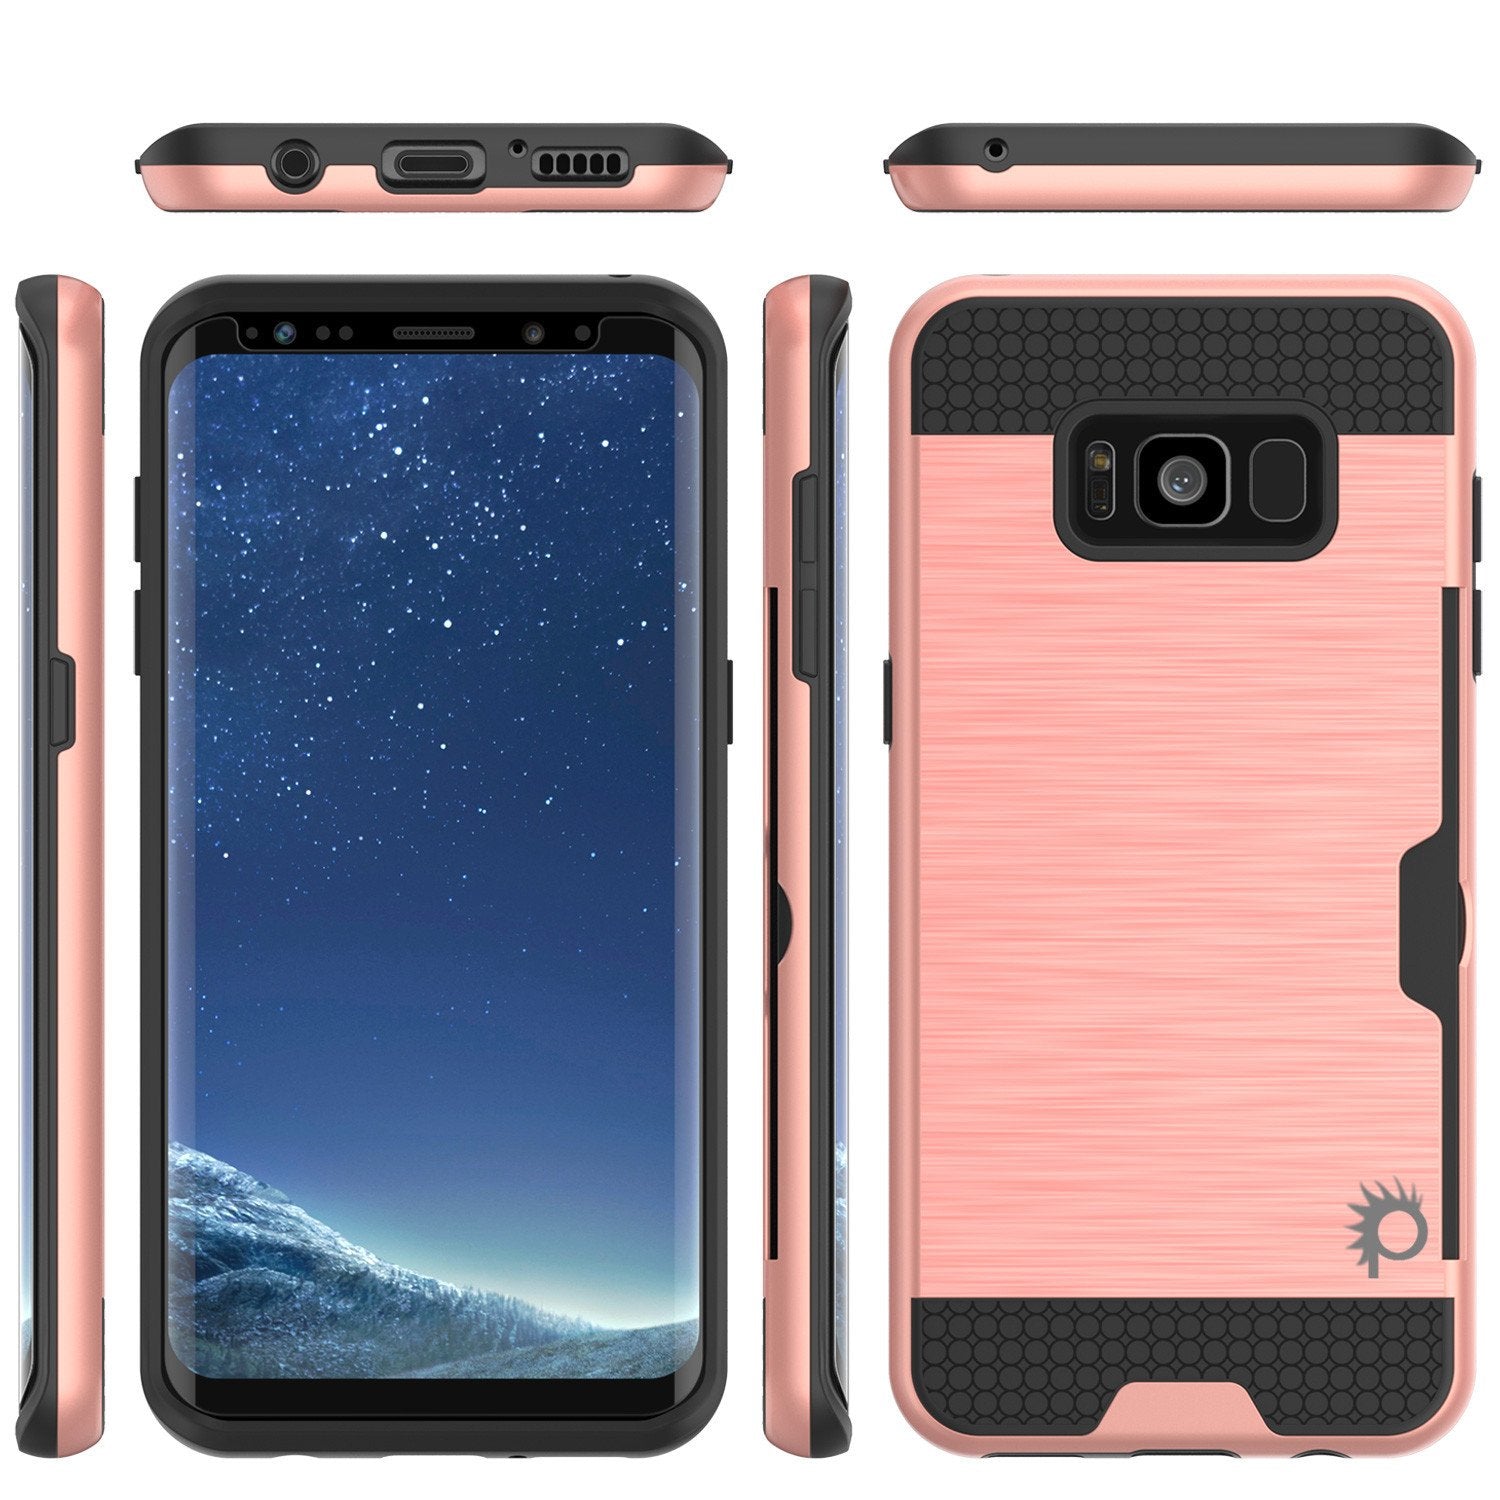 Galaxy S8 Plus case SLOT Series Dual-Layer Armor Cover, Rose Gold